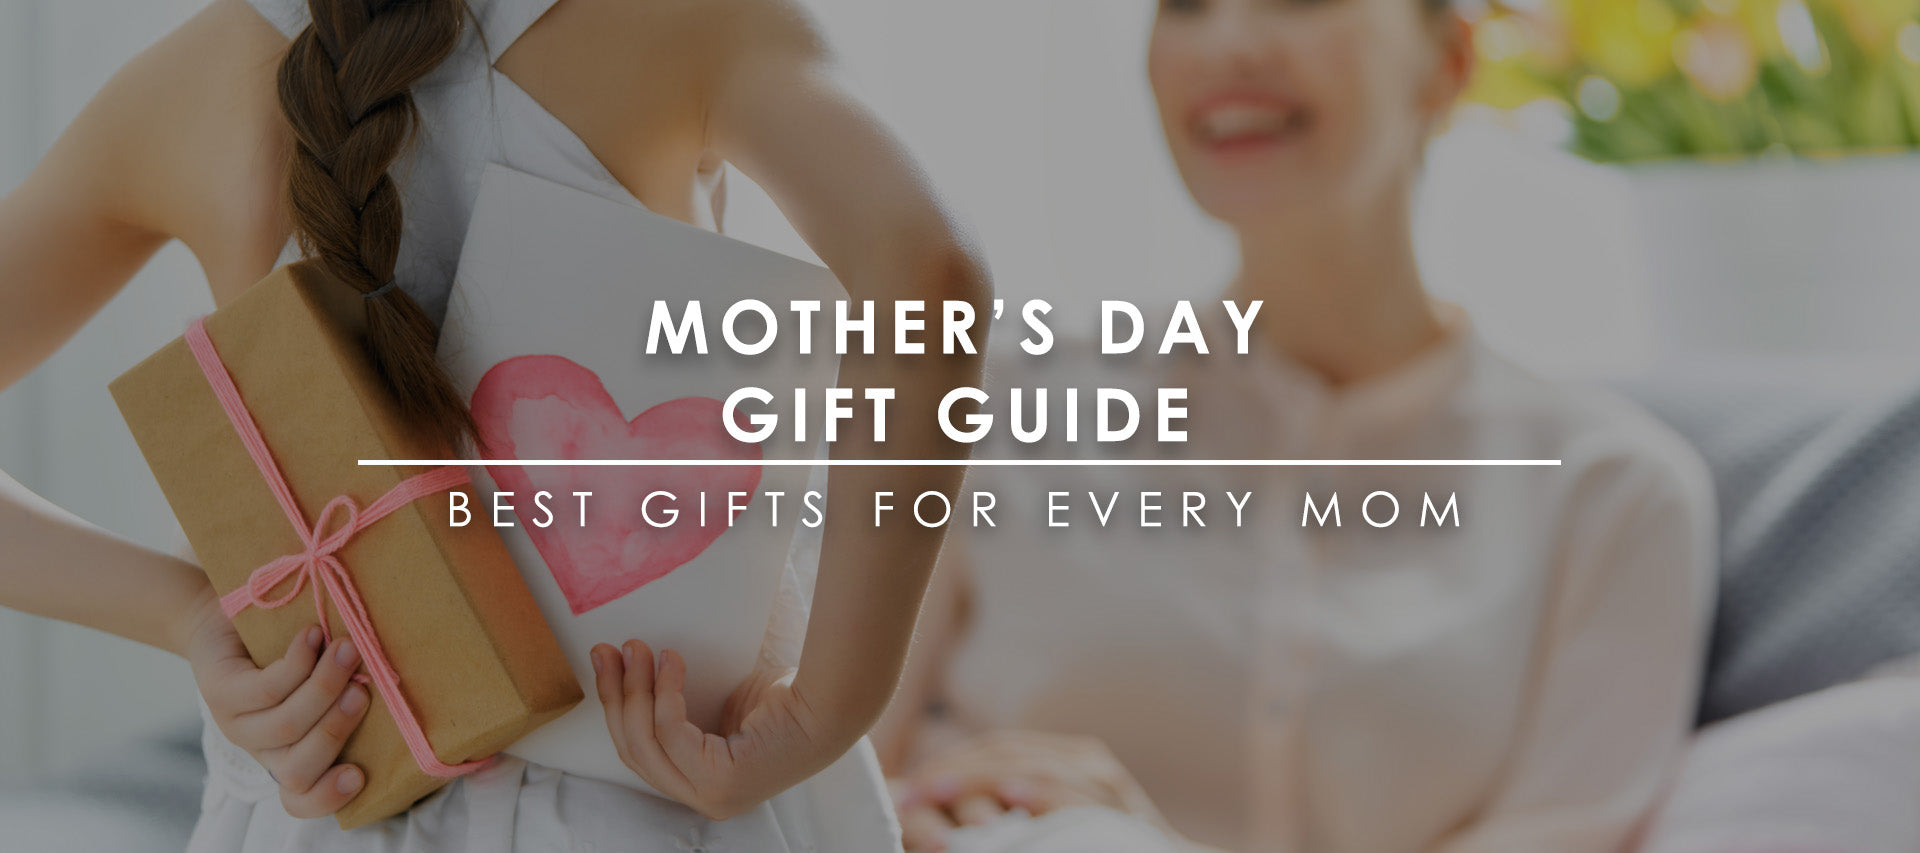 Mother's Day Gift Guide - Best Gifts for Every Mom by Roam Often